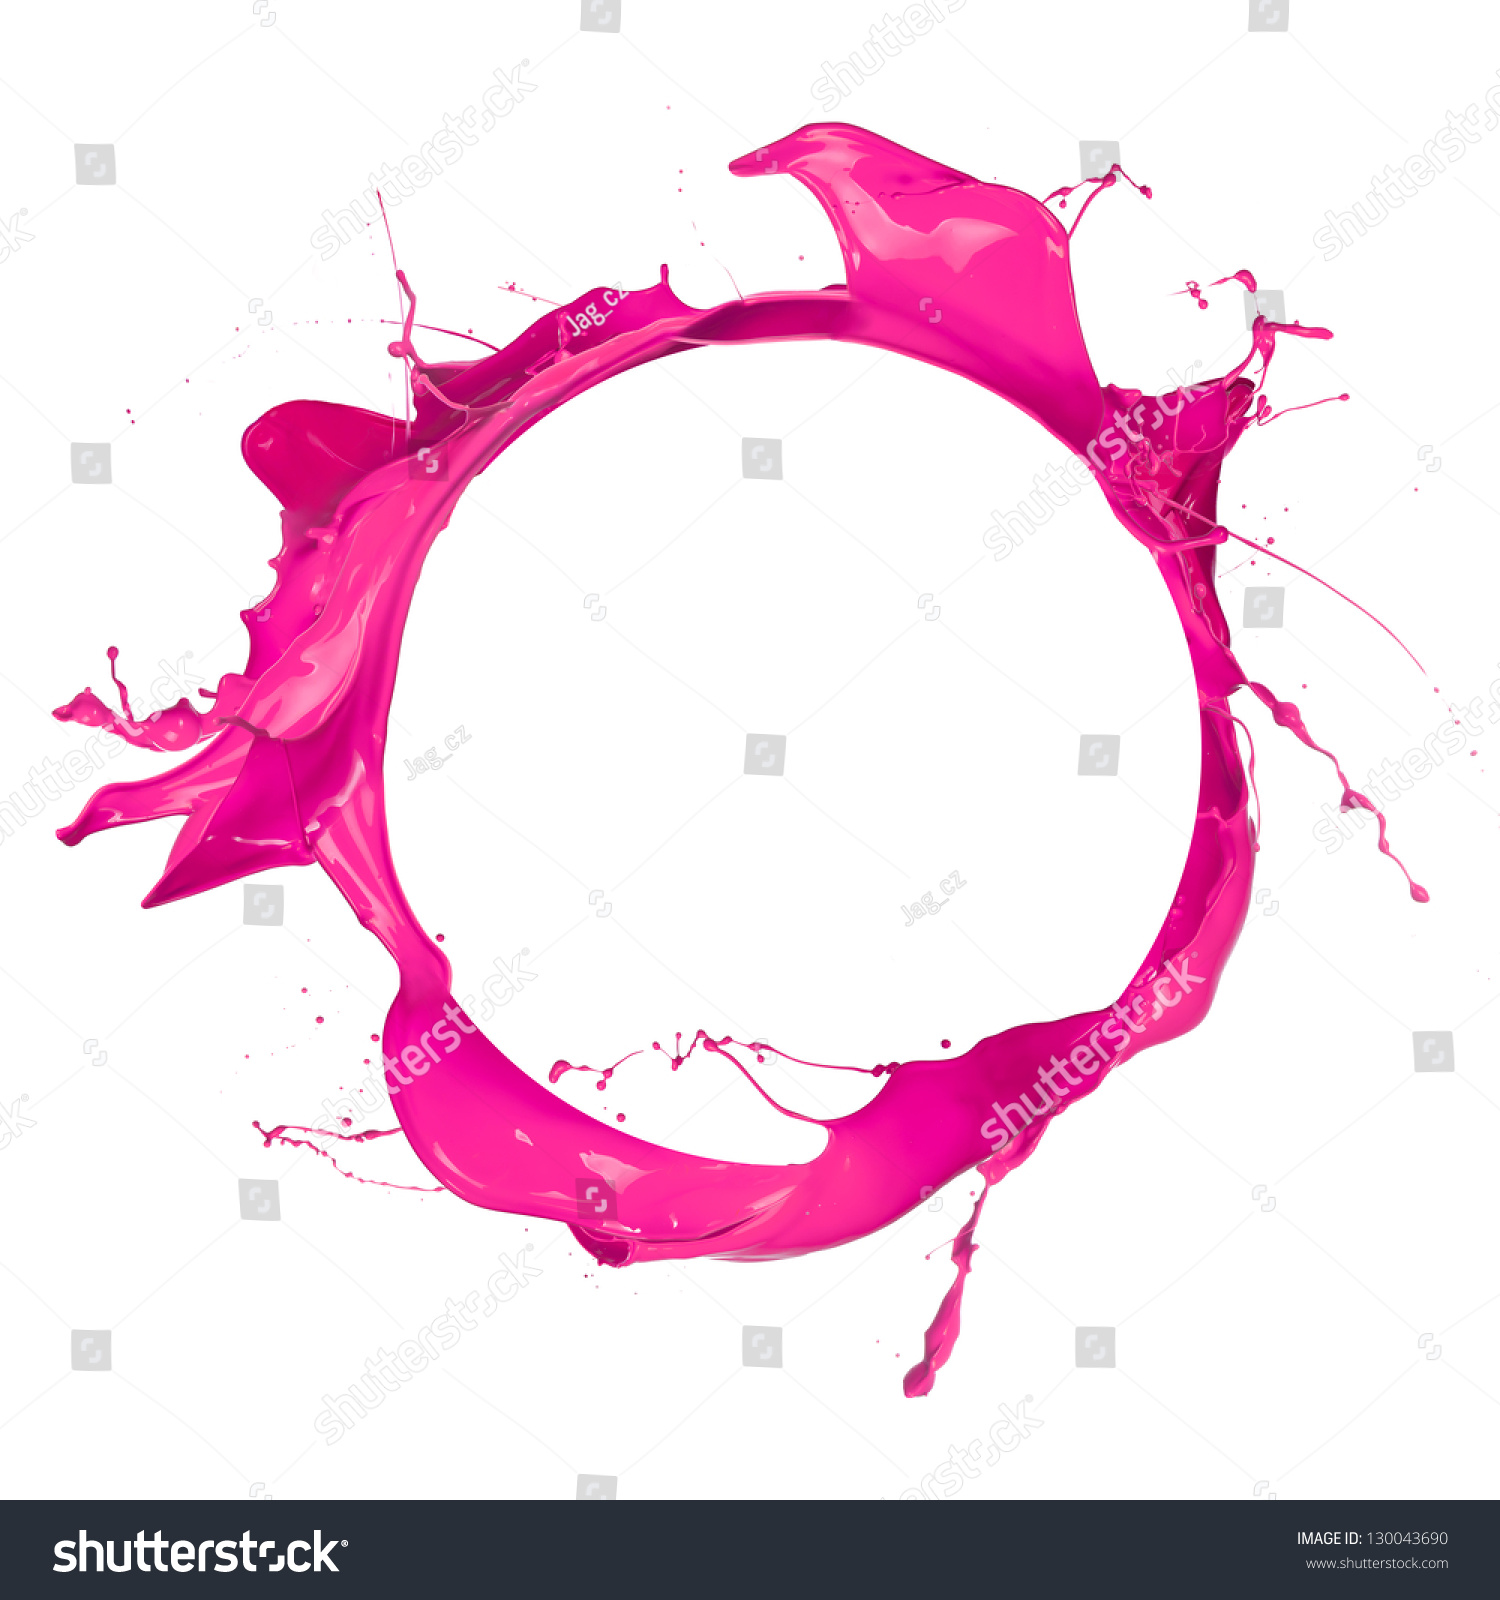 Circle of pink paint with free space for text, isolated on white background #130043690